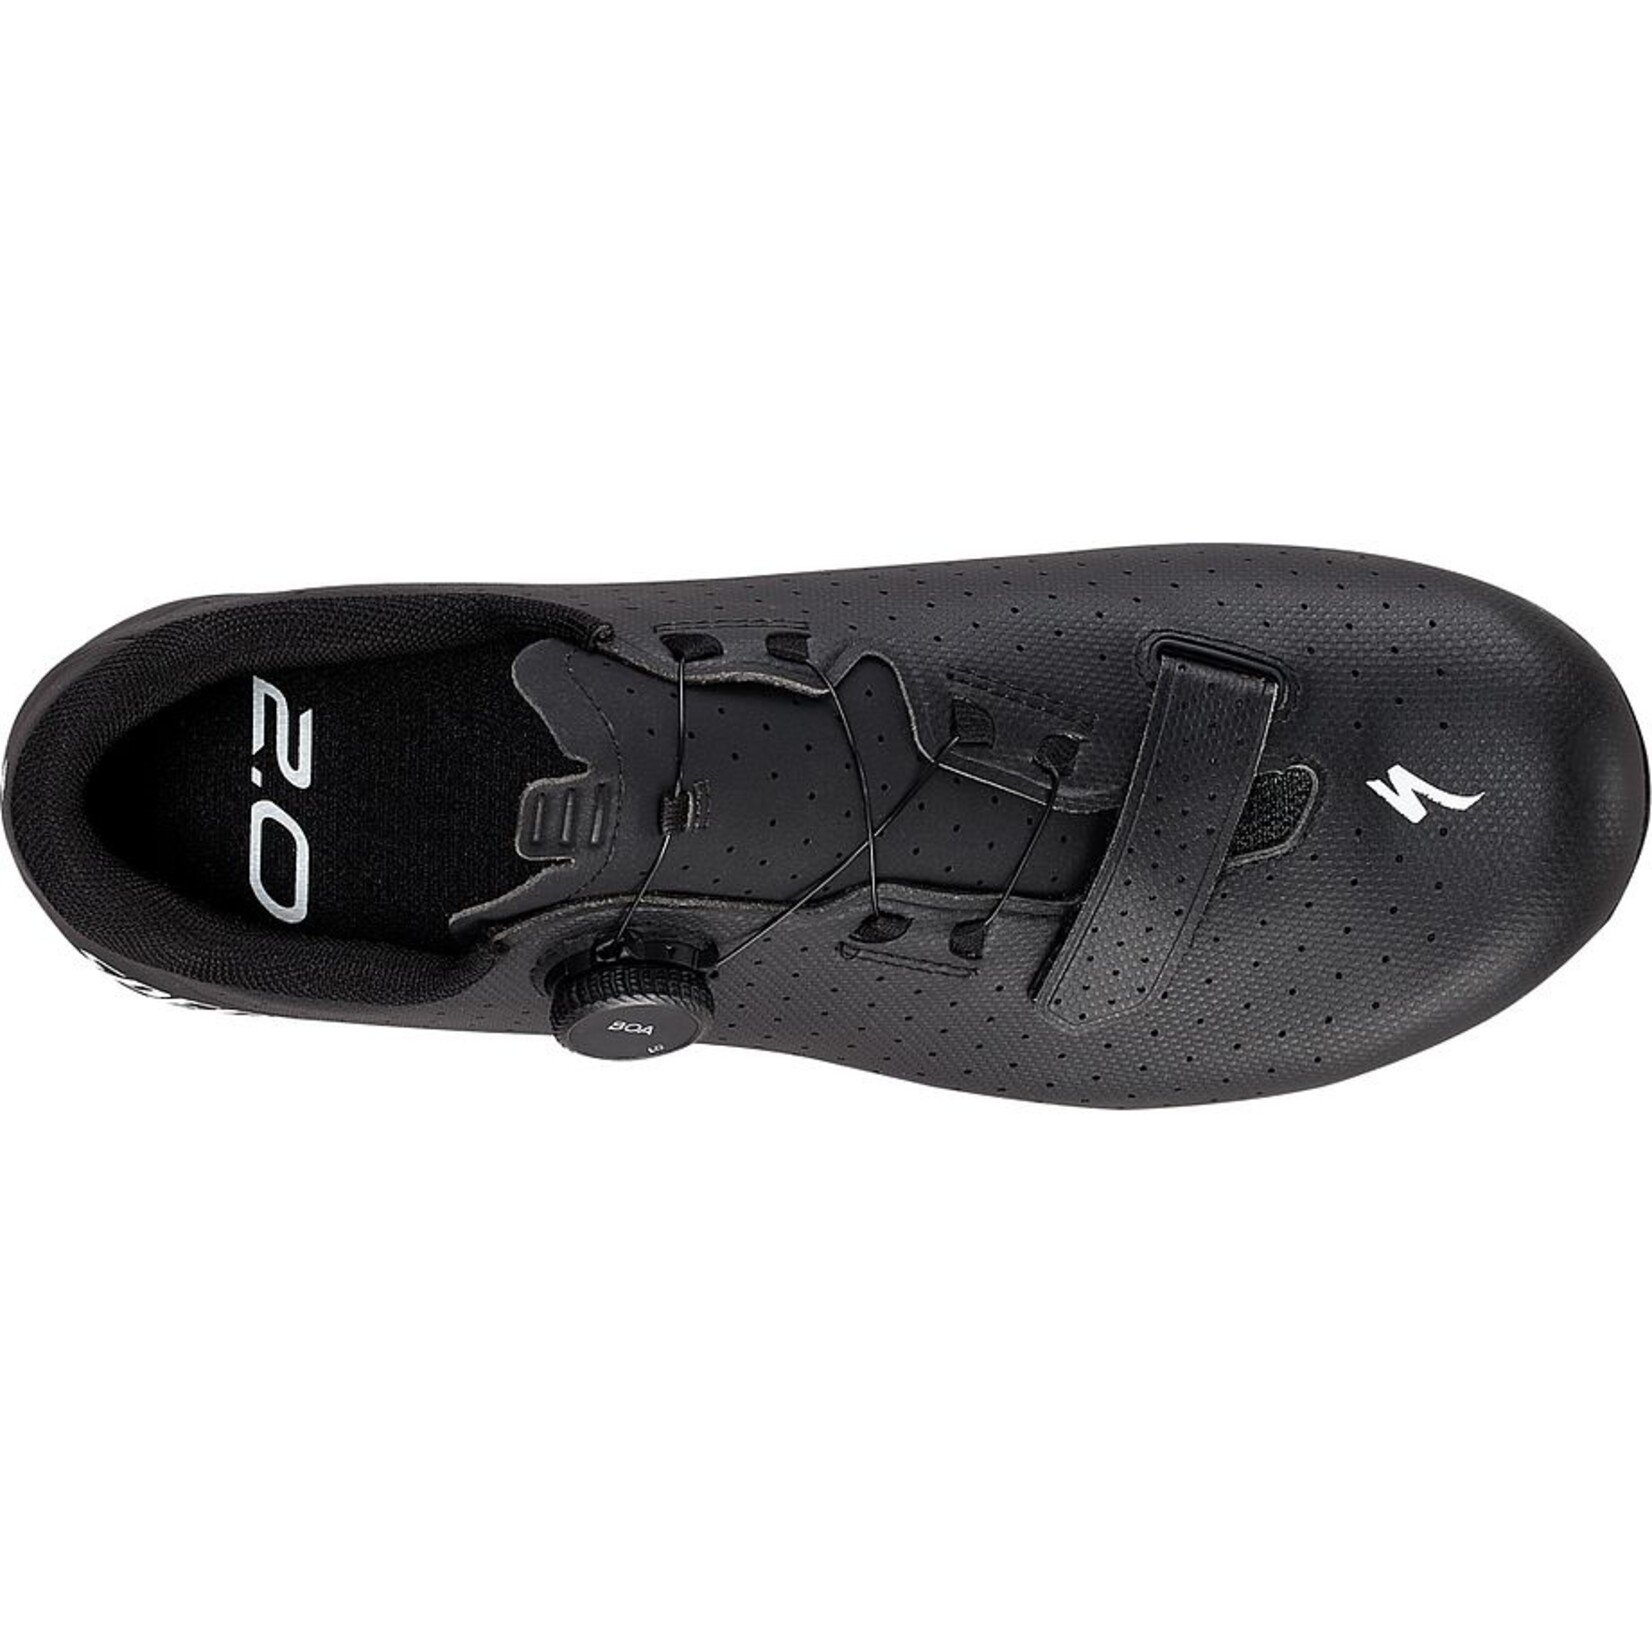 Specialized Torch 2.0 Road Shoes in Black